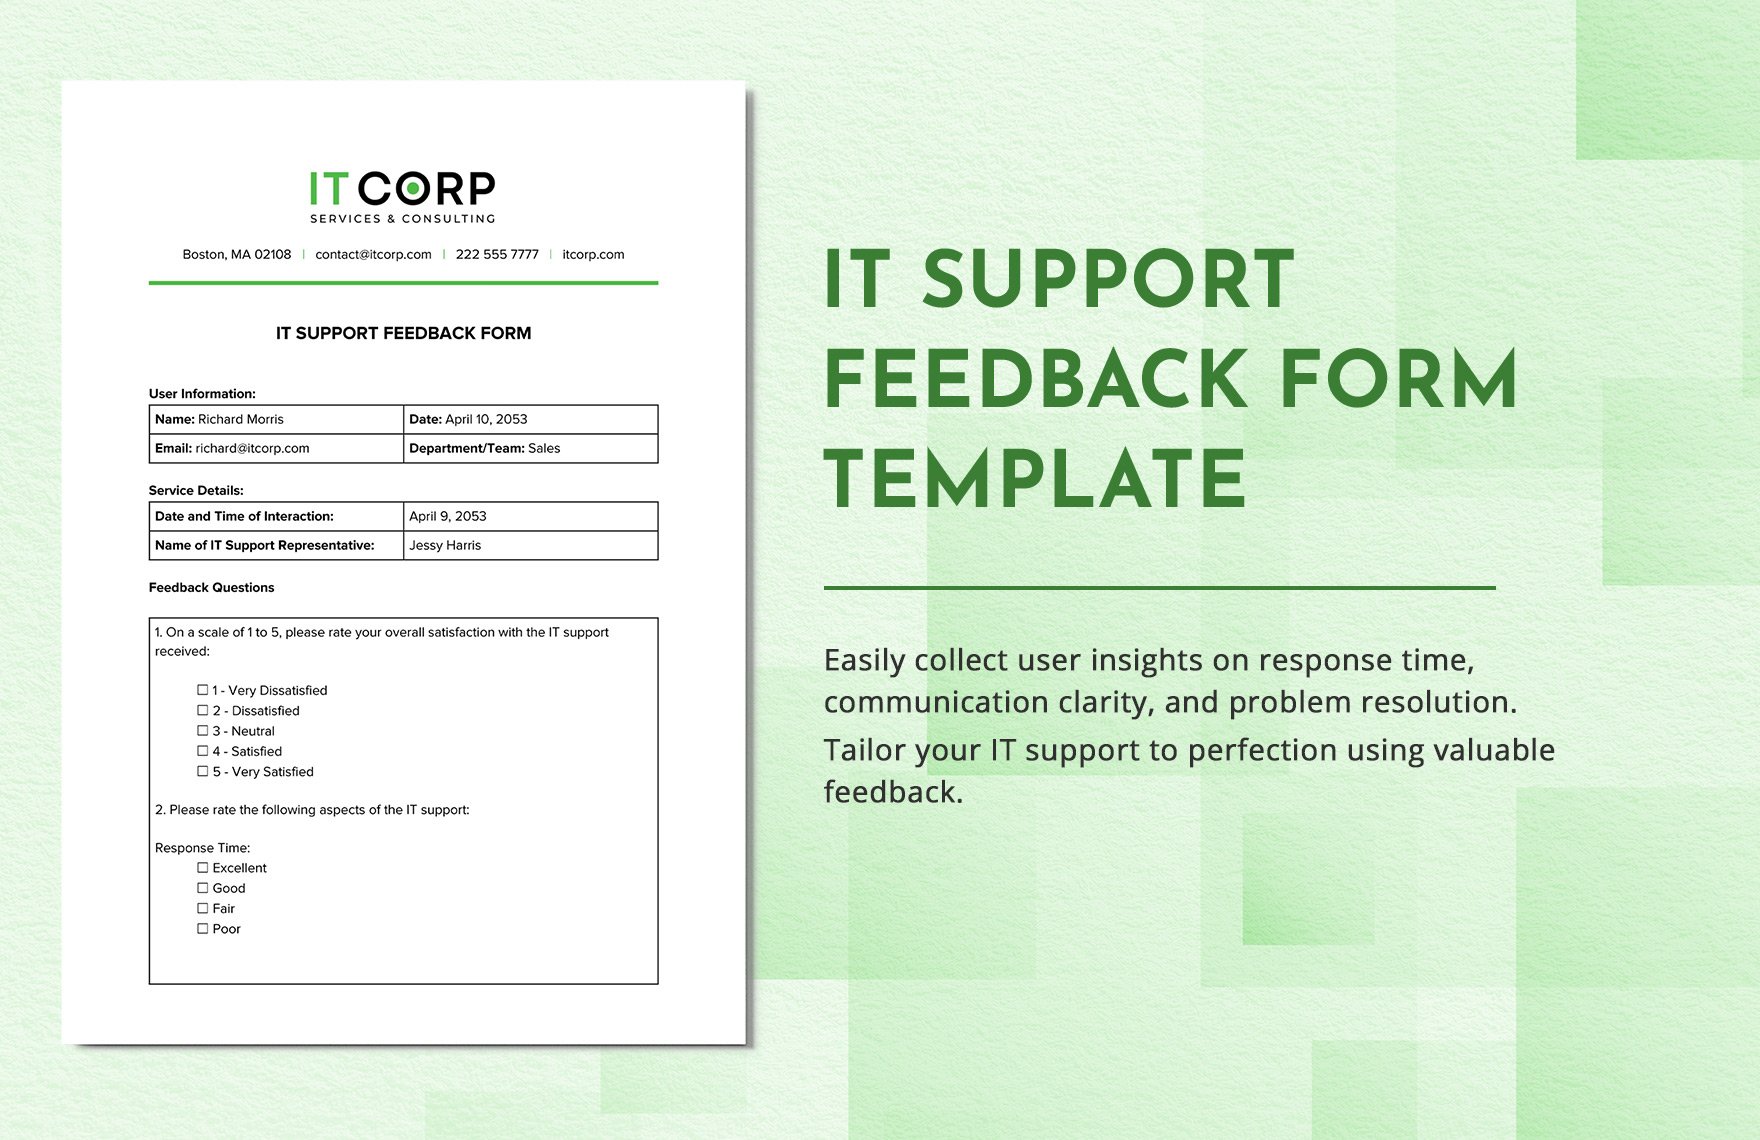 IT Support Feedback Form Template